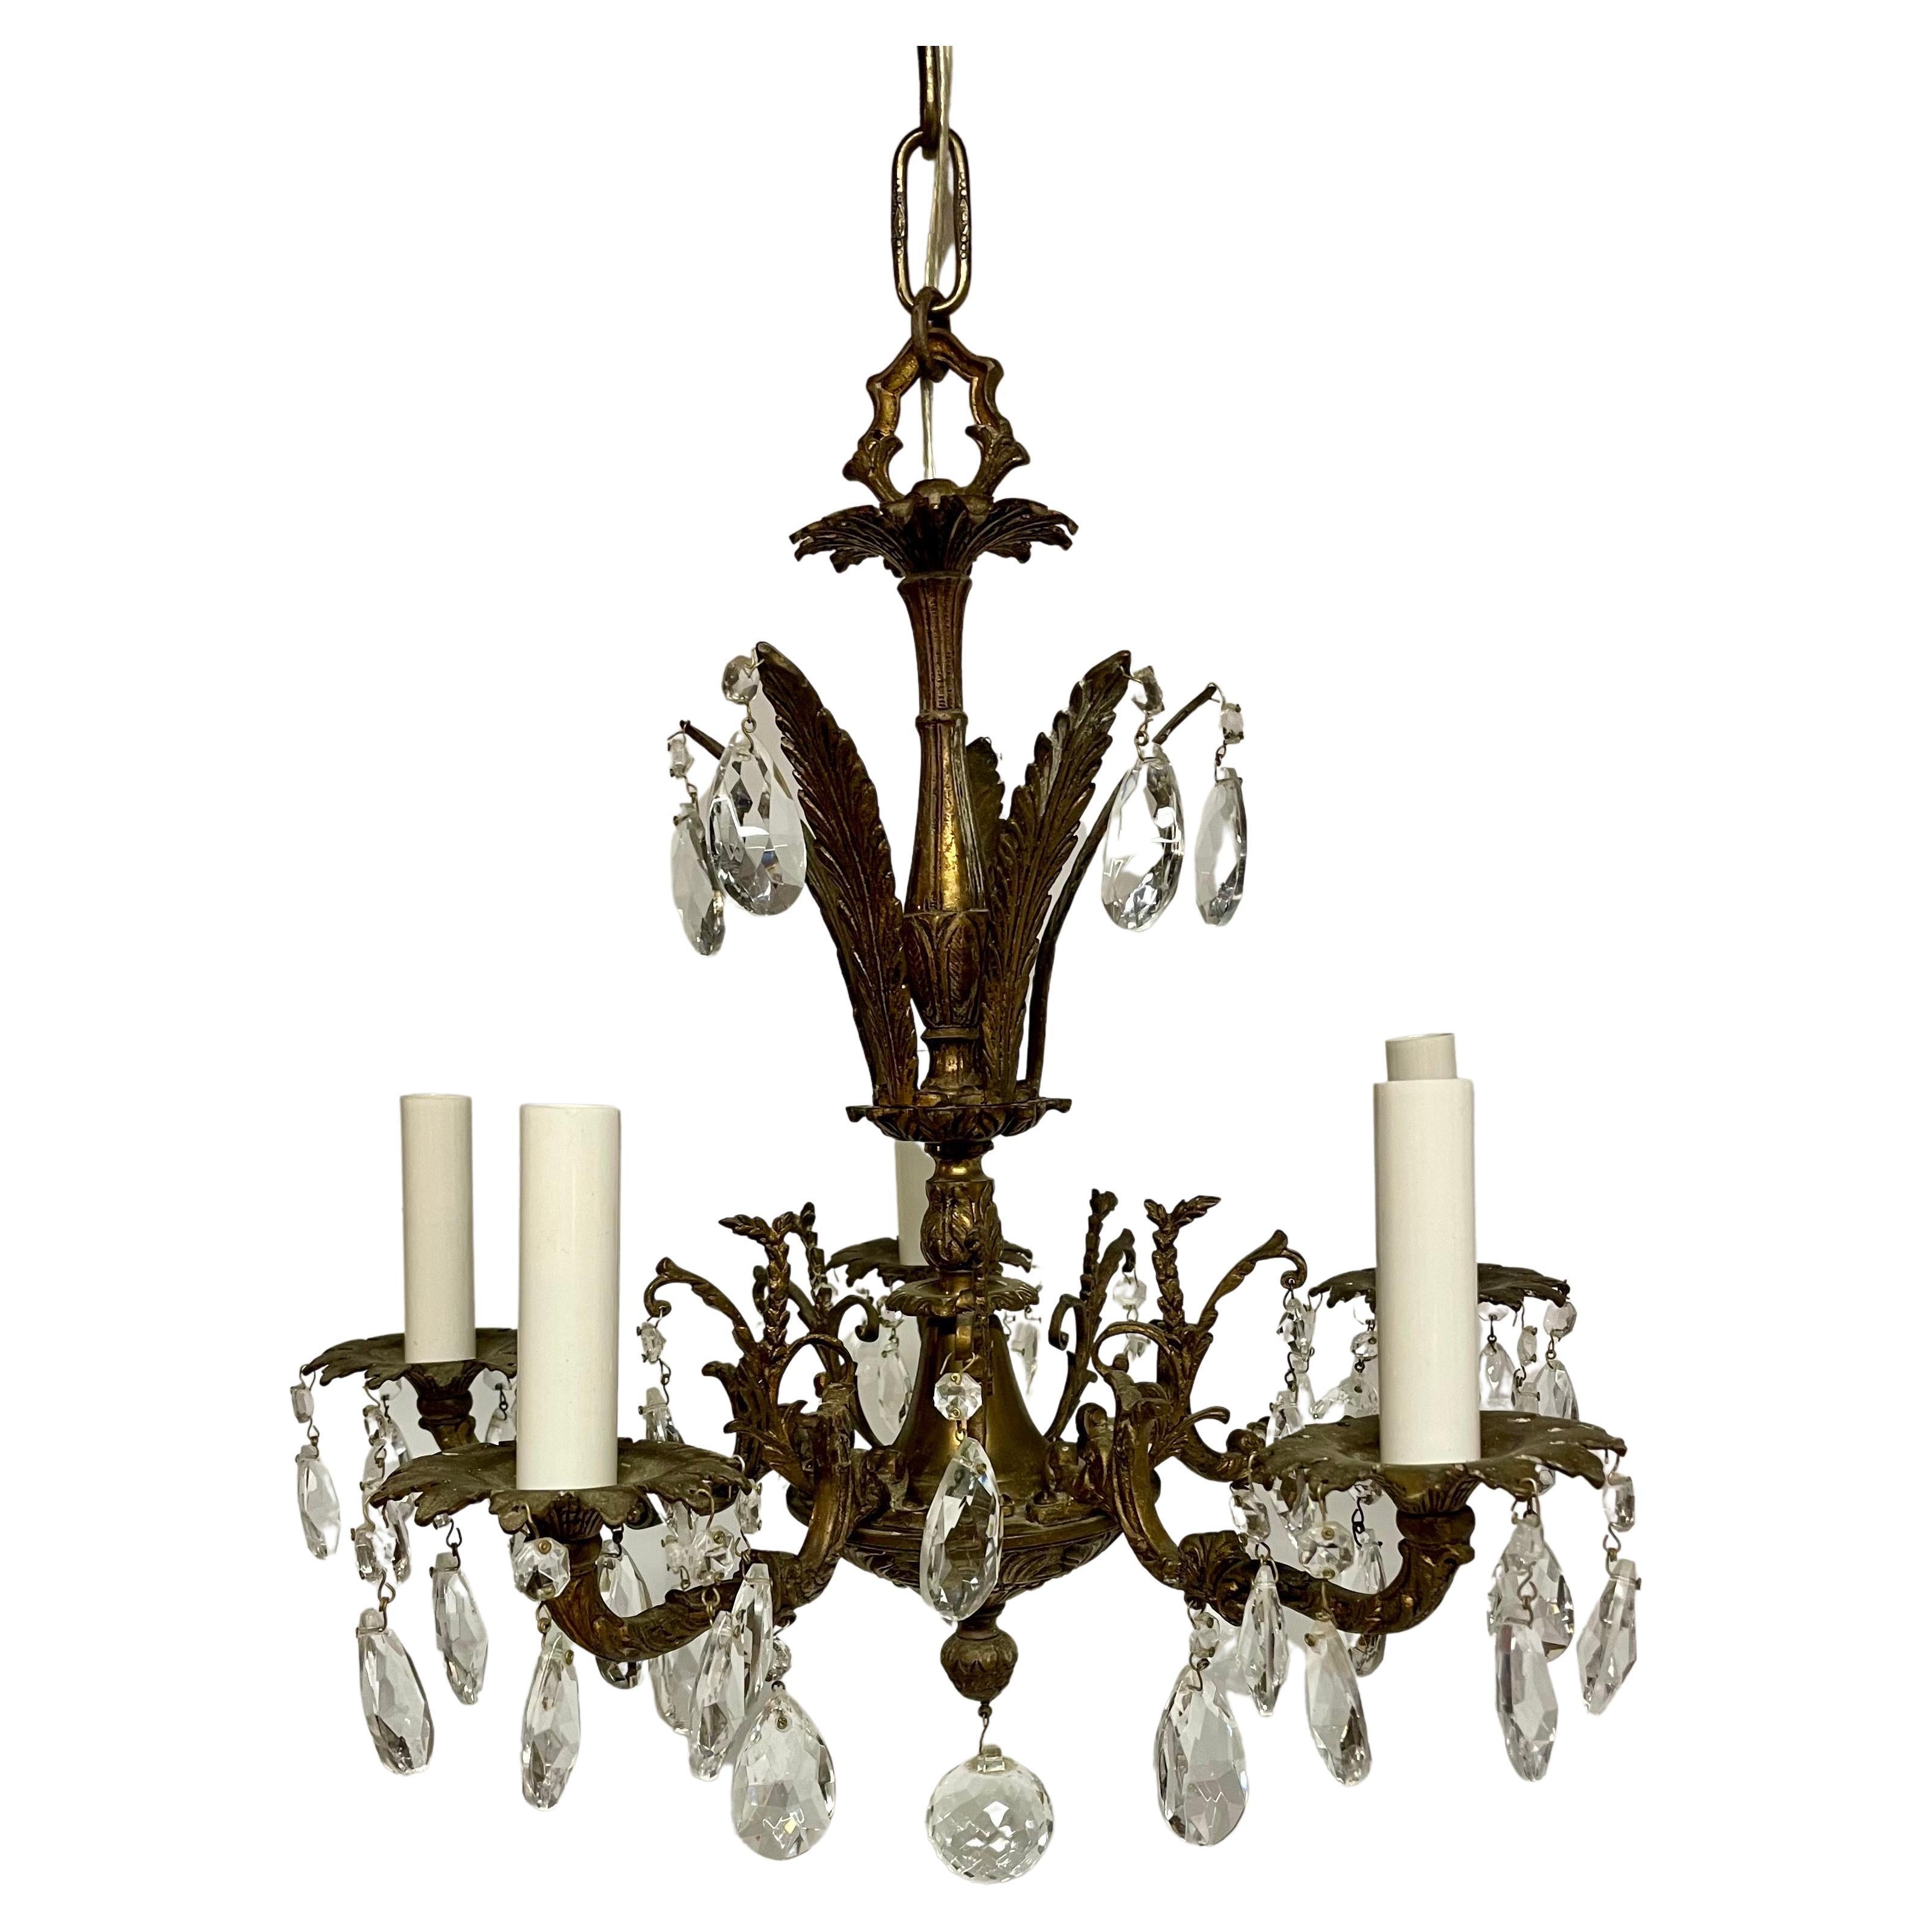 Vintage Bronze and Crystal French Style Chandelier with Five Arms. Very good detail in the bronze arms and body of the chandelier. Original shimmering crystals featuring two sizes plus large round ball adorning the bottom finial. Rewired with clear